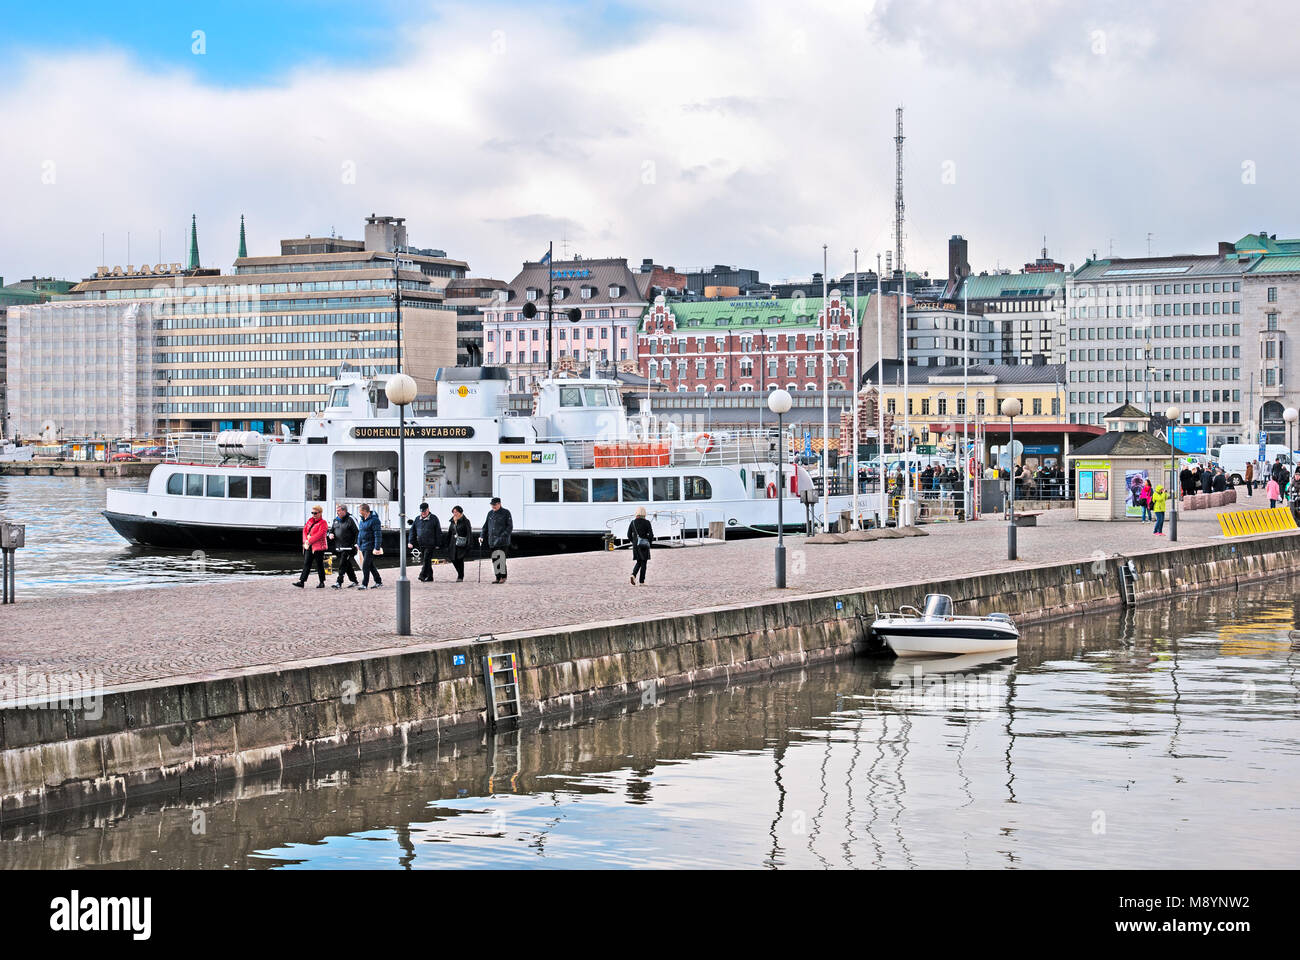 HELSINKI, FINLAND - APRIL 23, 2016: People walk on the quay near The Market Square and pier with ferry to Suomenlinna (Sveaborg) Fortress Stock Photo